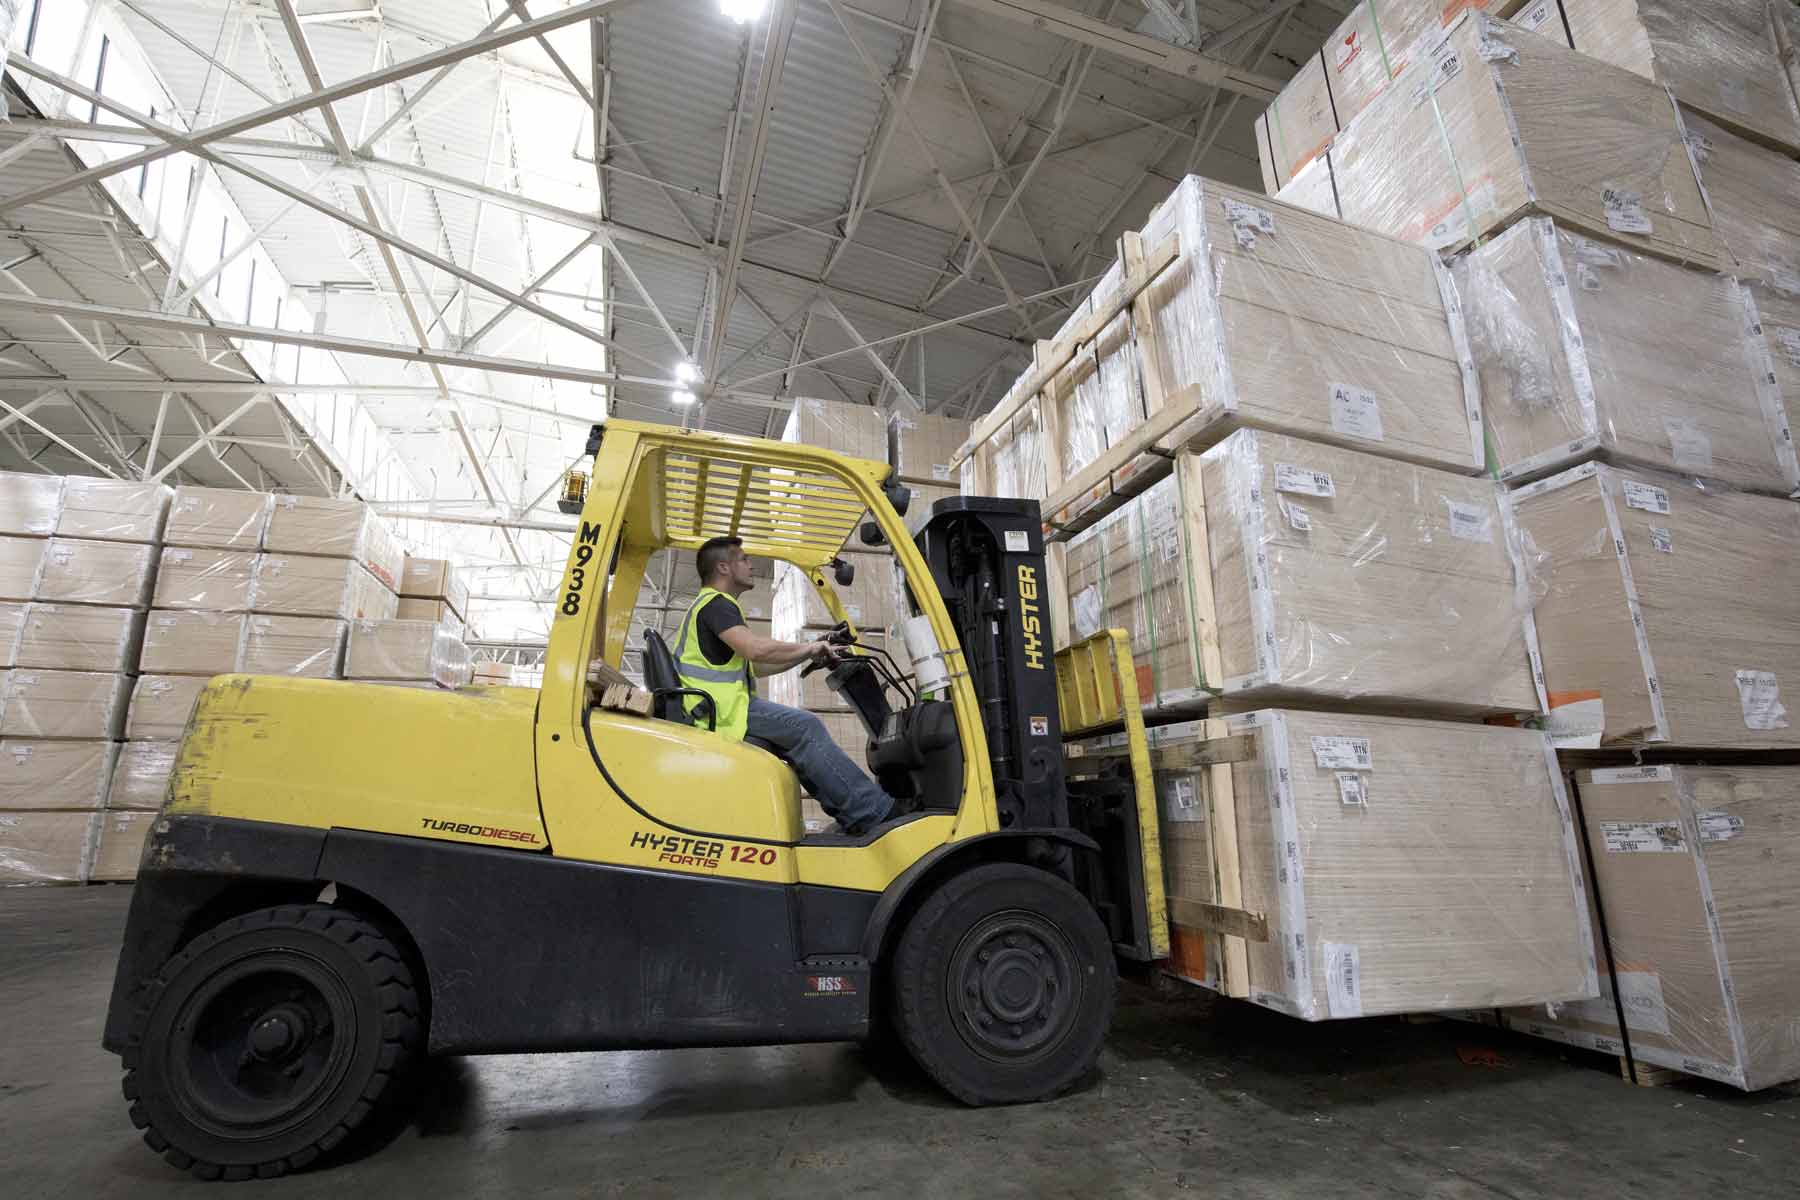 forklift operating in warehouse